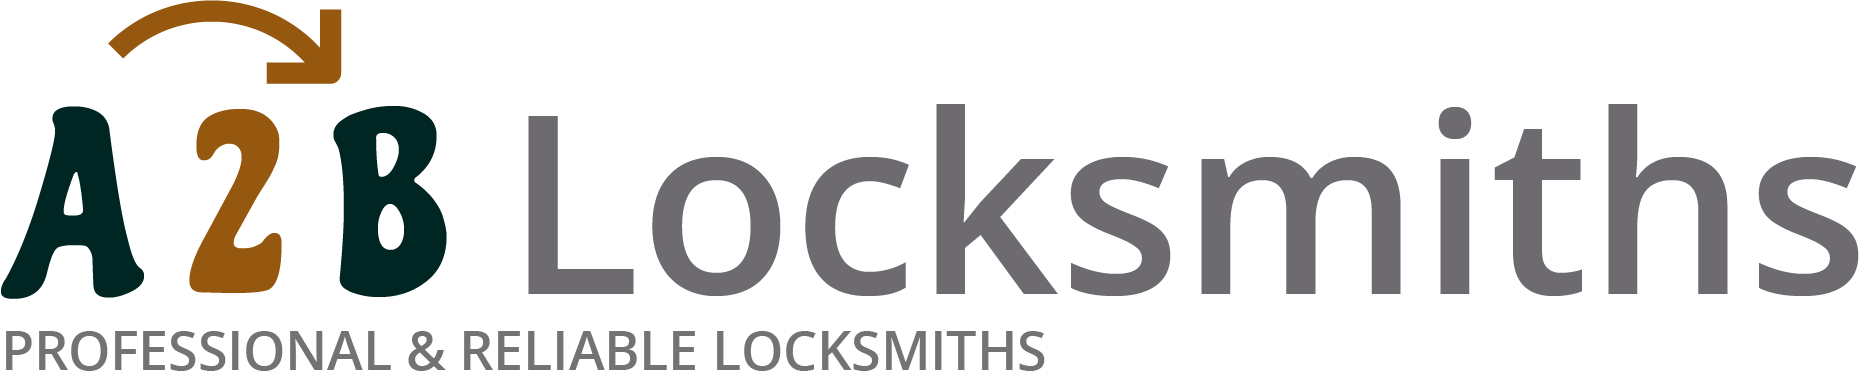 If you are locked out of house in Ruislip, our 24/7 local emergency locksmith services can help you.